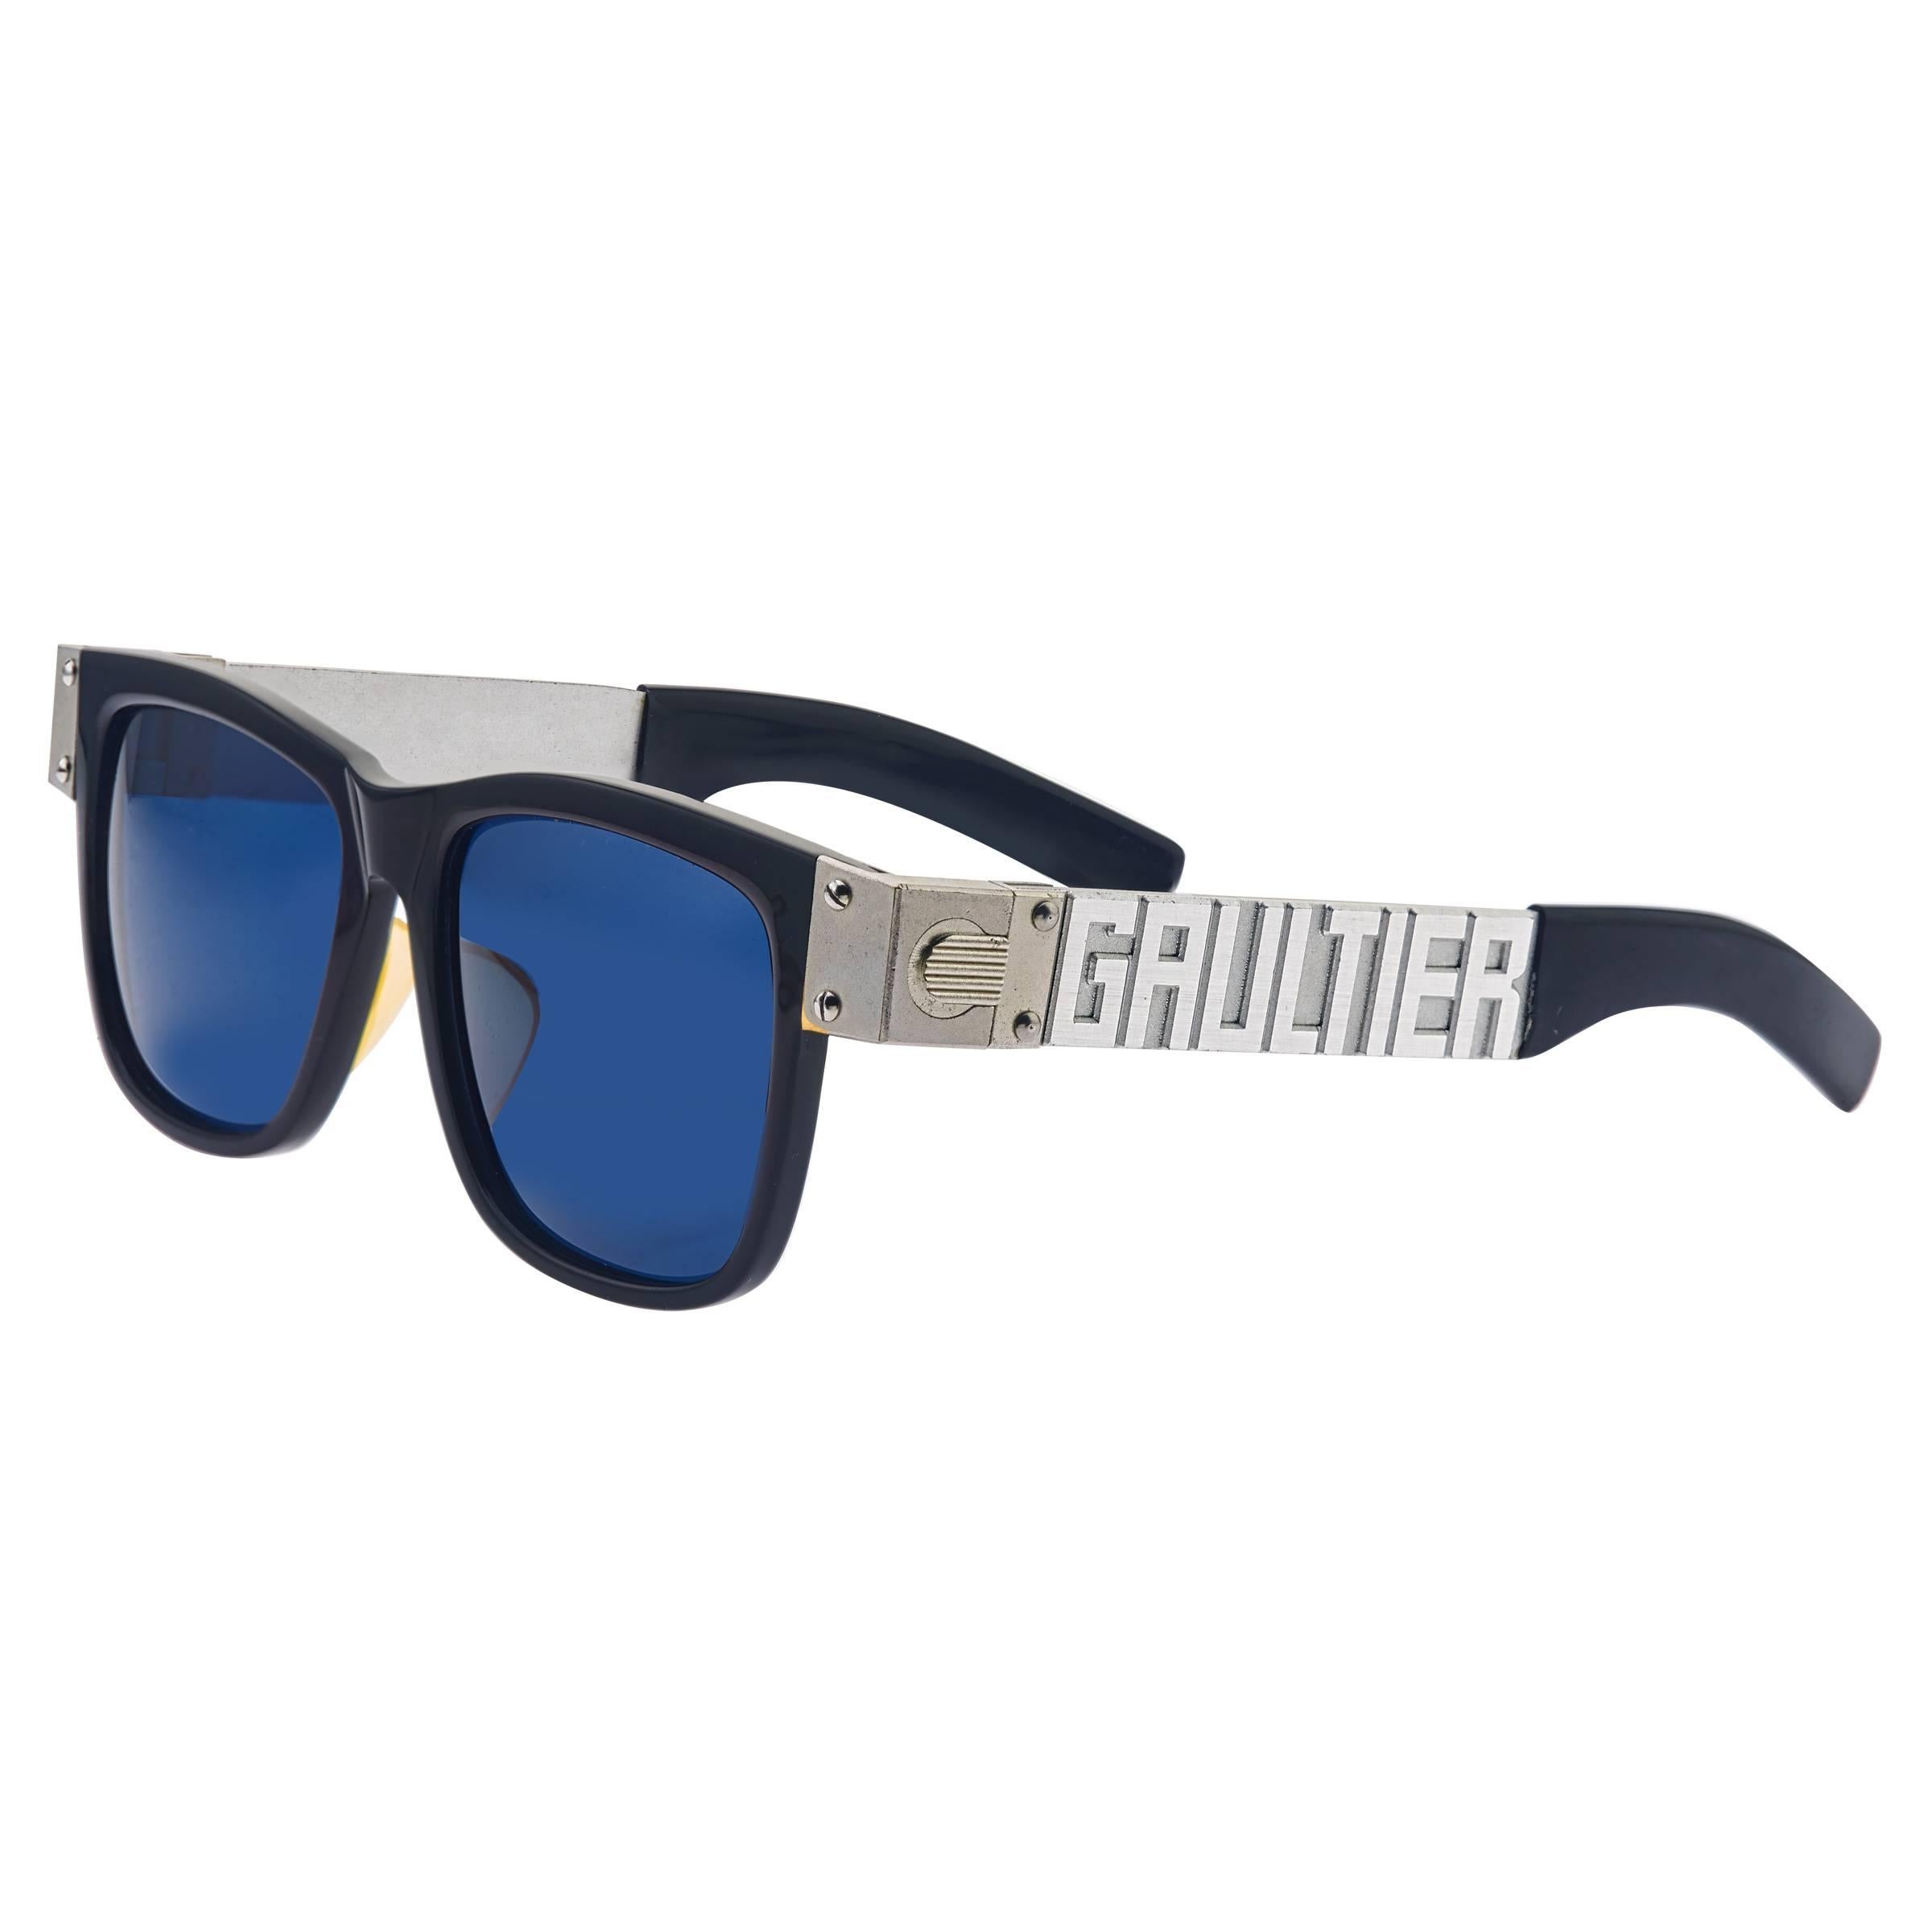 Vintage Jean Paul Gaultier 56-8002 Sunglasses In Excellent Condition For Sale In Chicago, IL